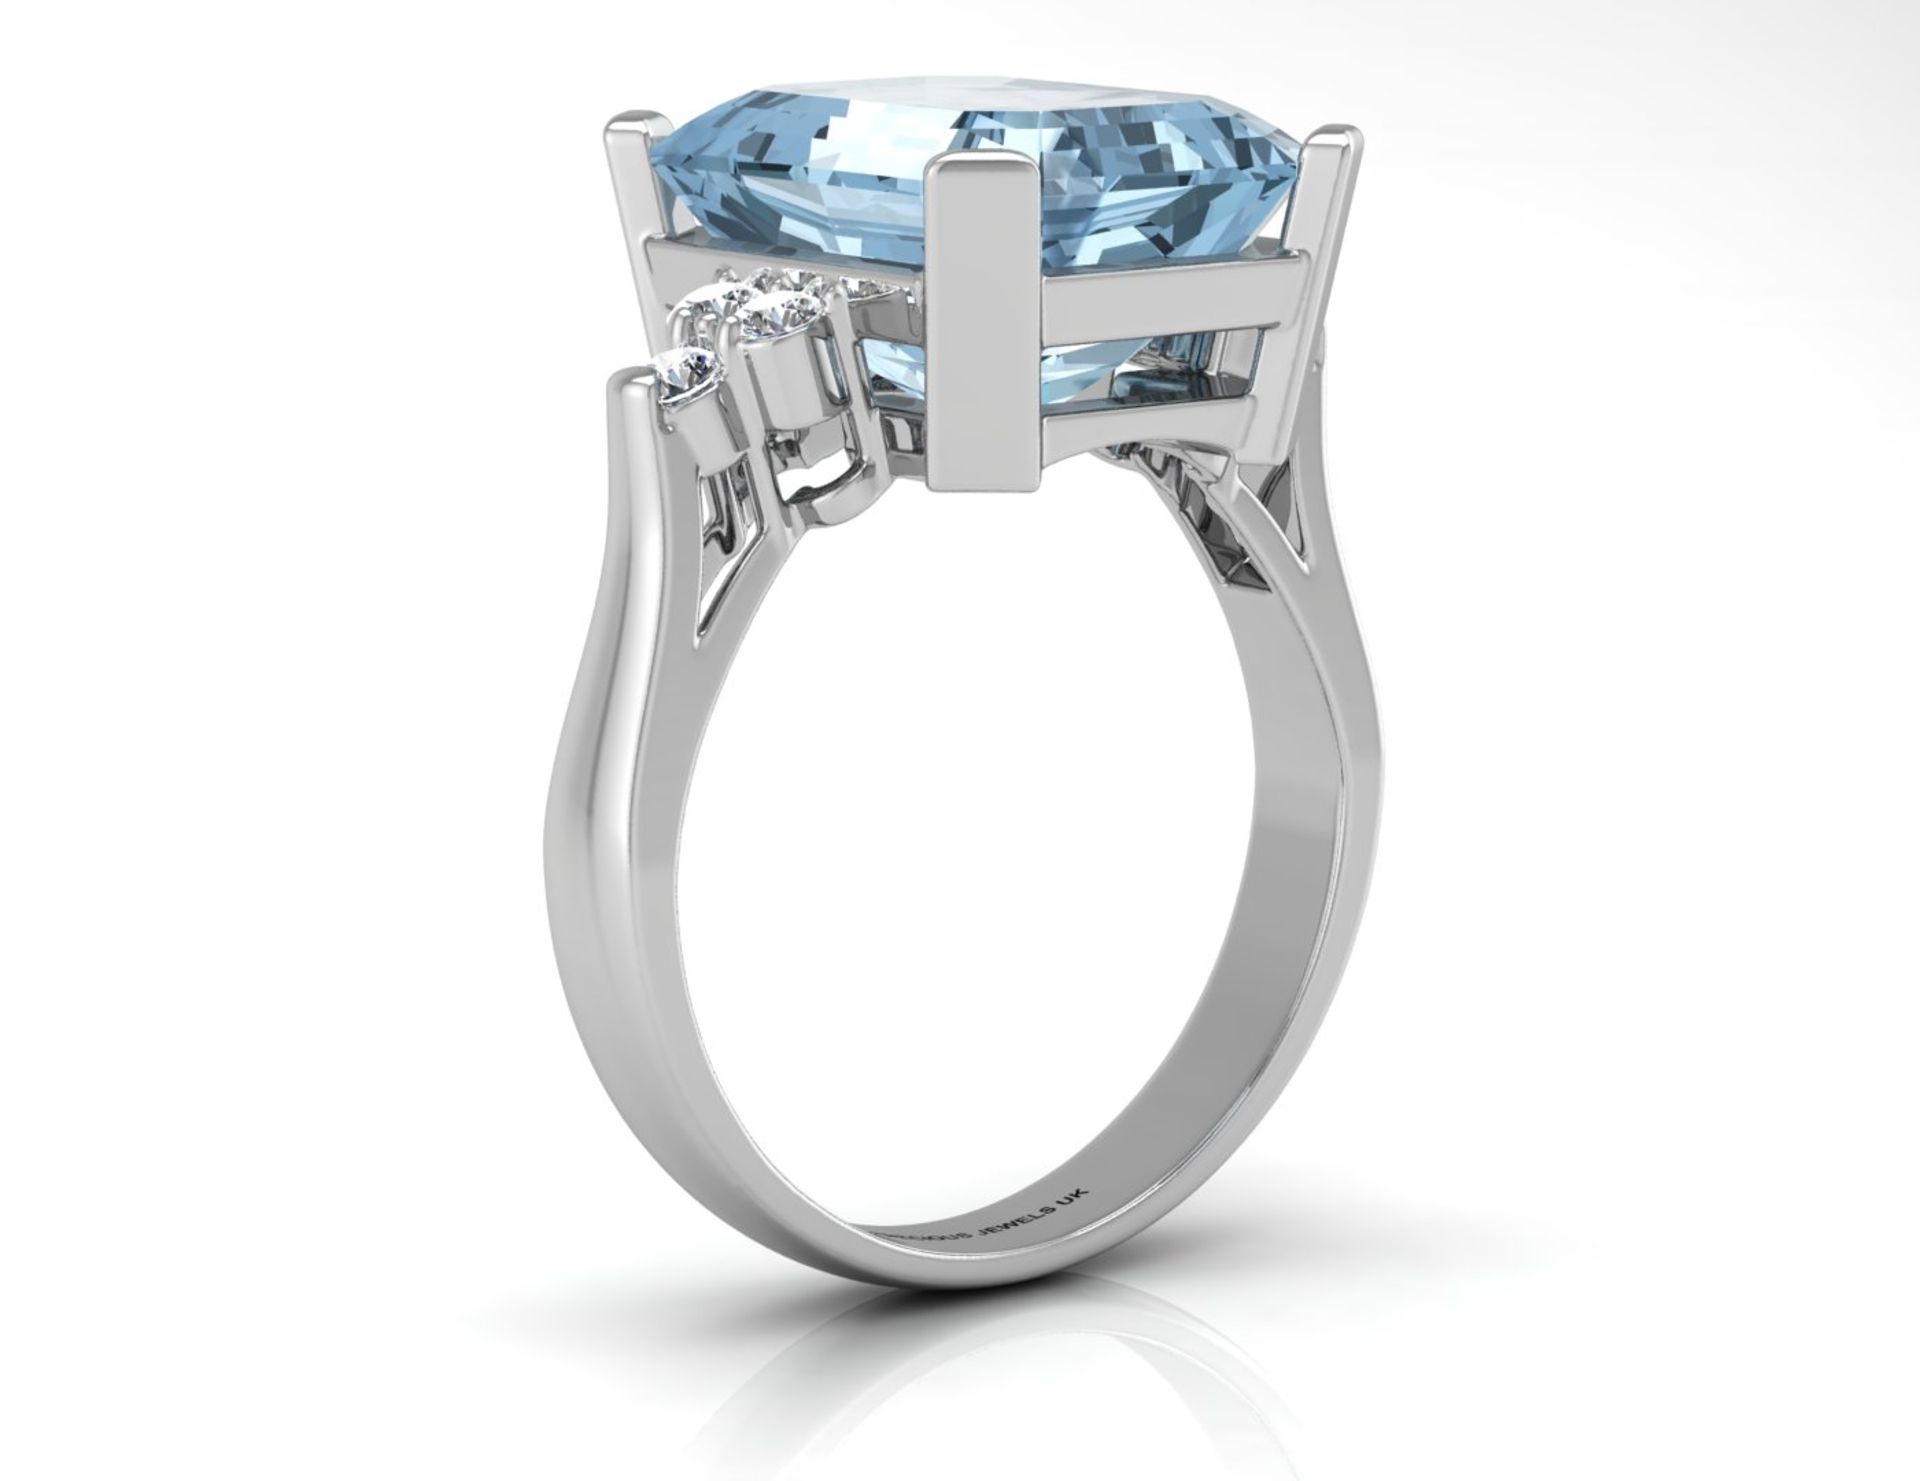 9ct White Gold Diamond And Blue Topaz Ring 0.18 Carats - Valued by GIE £3,995.00 - 9ct White Gold - Image 2 of 5